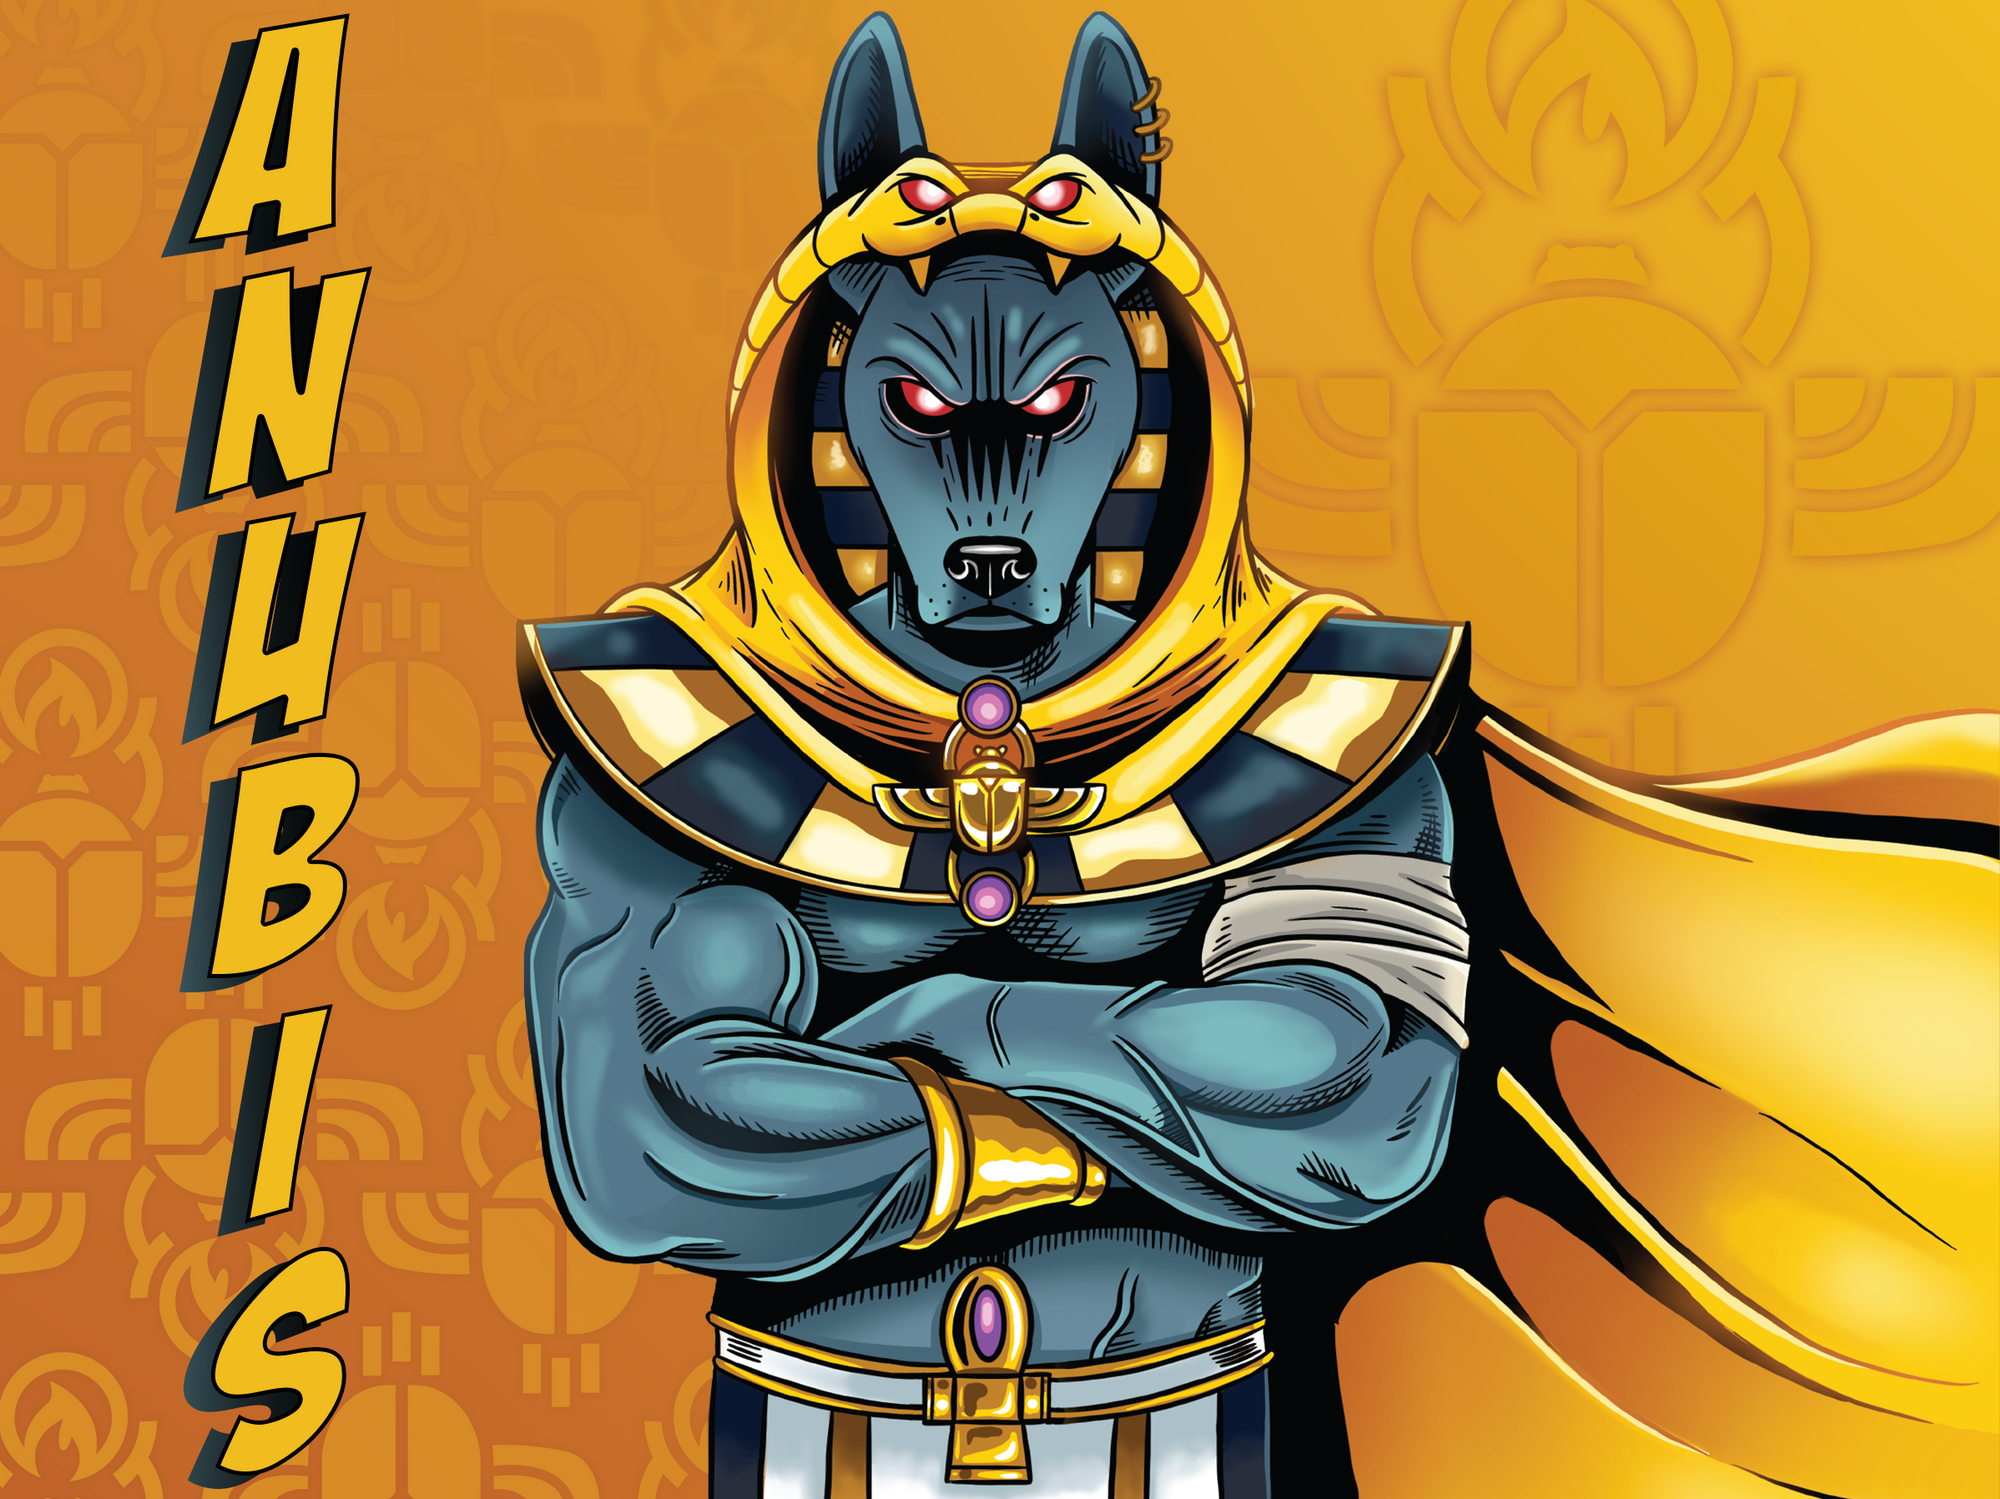 Comic style mythological character, wearing Egyptian style clothing and a goldenrod yellow jackal hat with beetle and fire icon in background, with name title Anubis